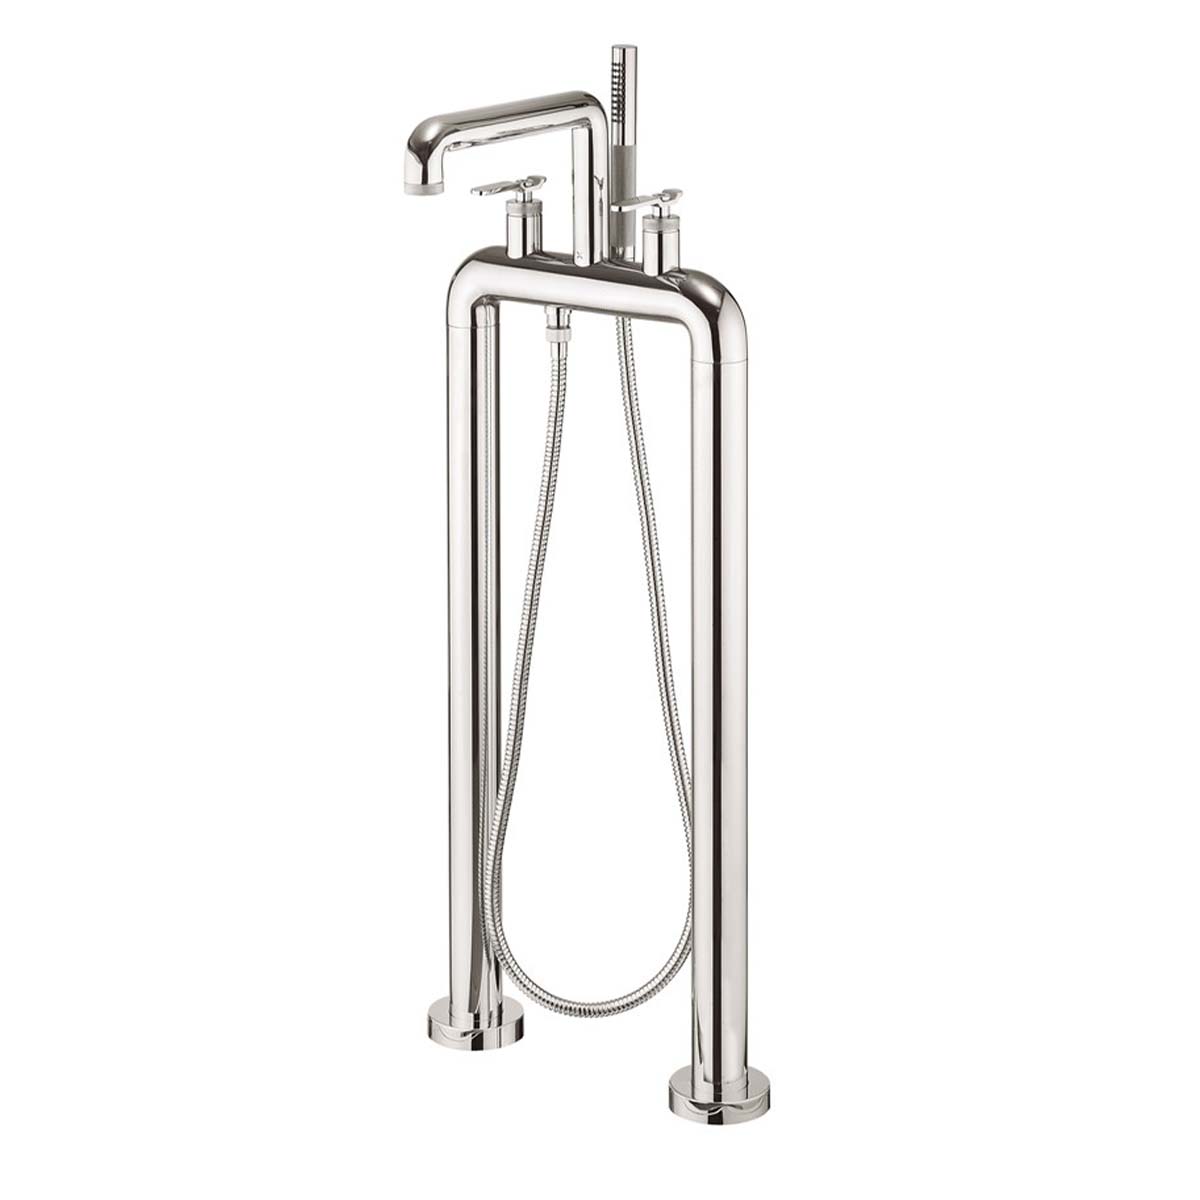 Crosswater Union Bath Shower Mixer With Lever Handles Chrome